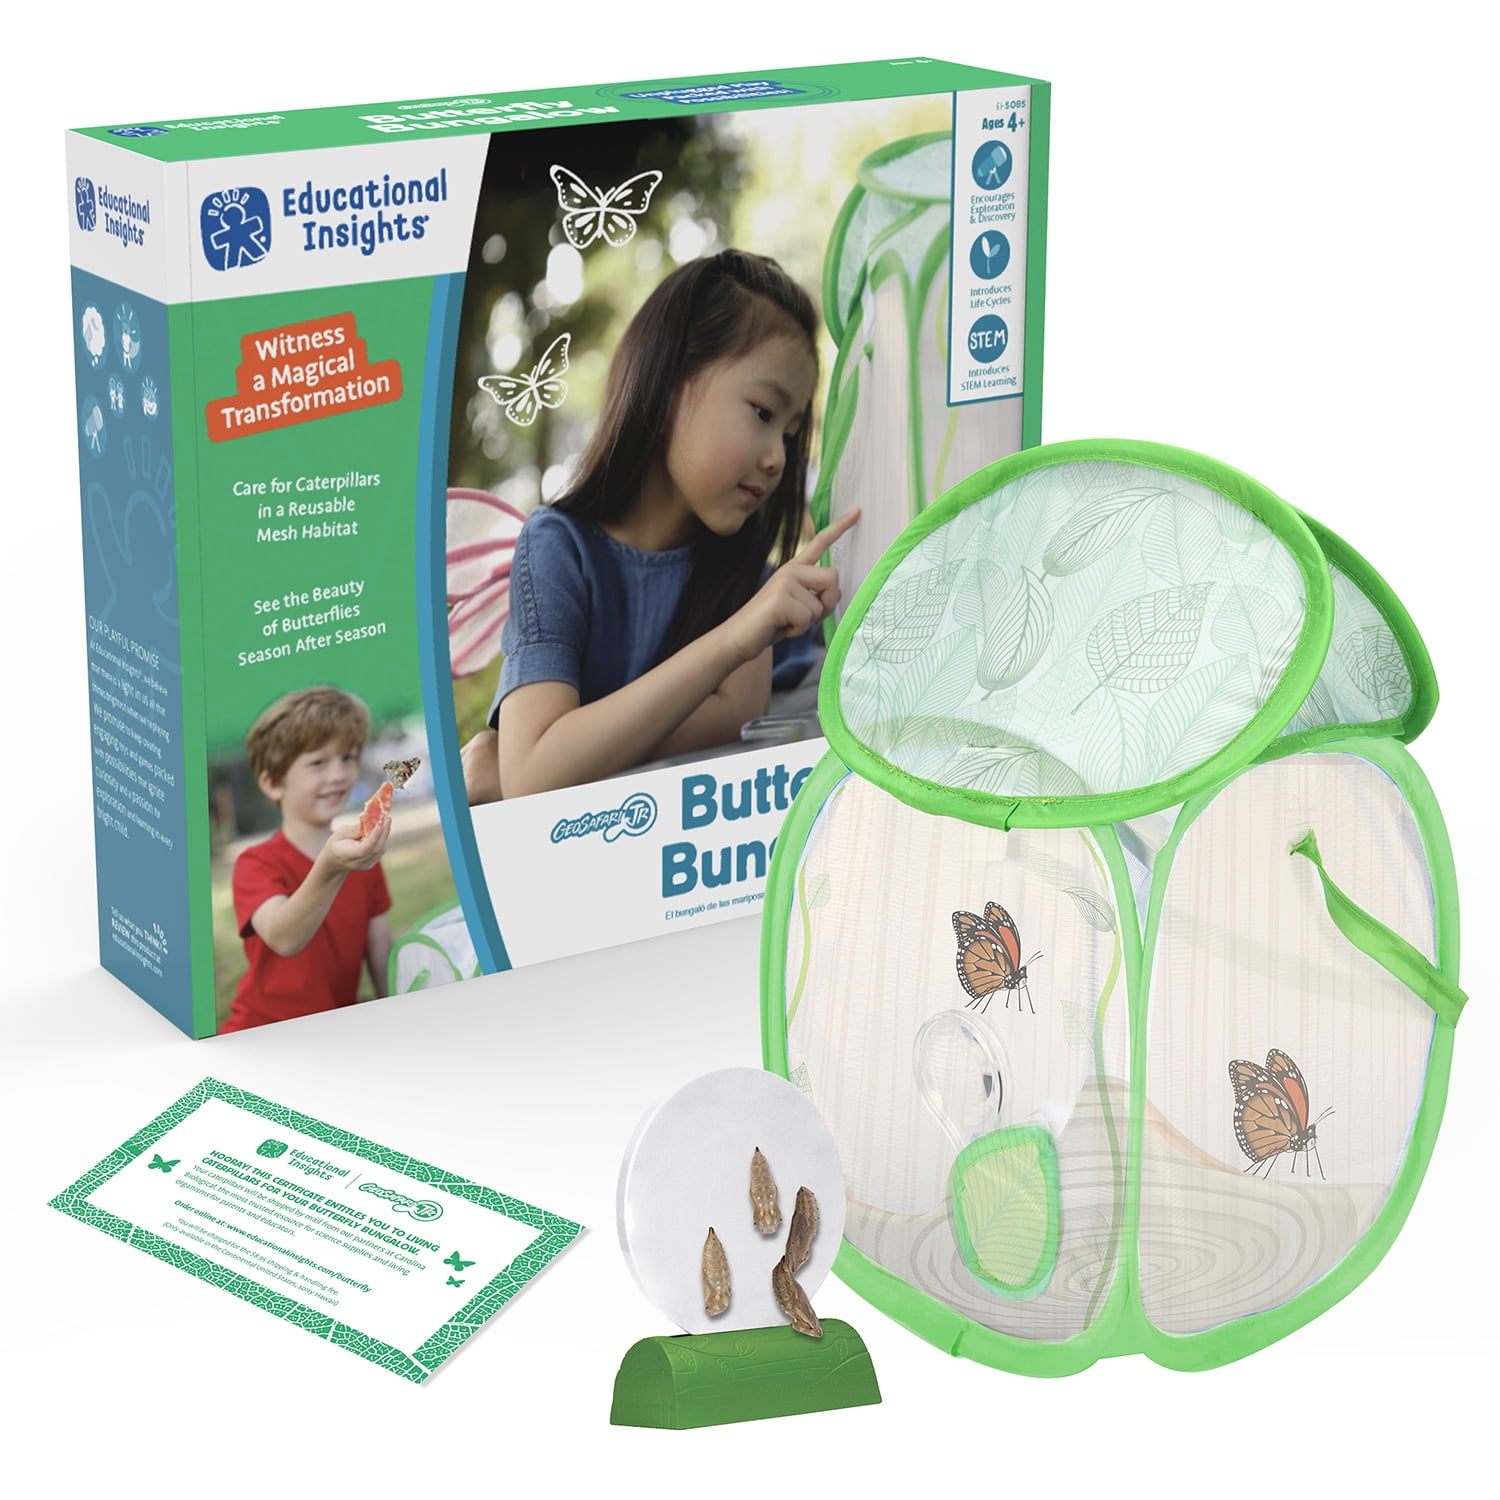 Details about   Discovery Mindblown Maze Planter Stem DIY Build & Grow Botany Kit *Easter Gift* 